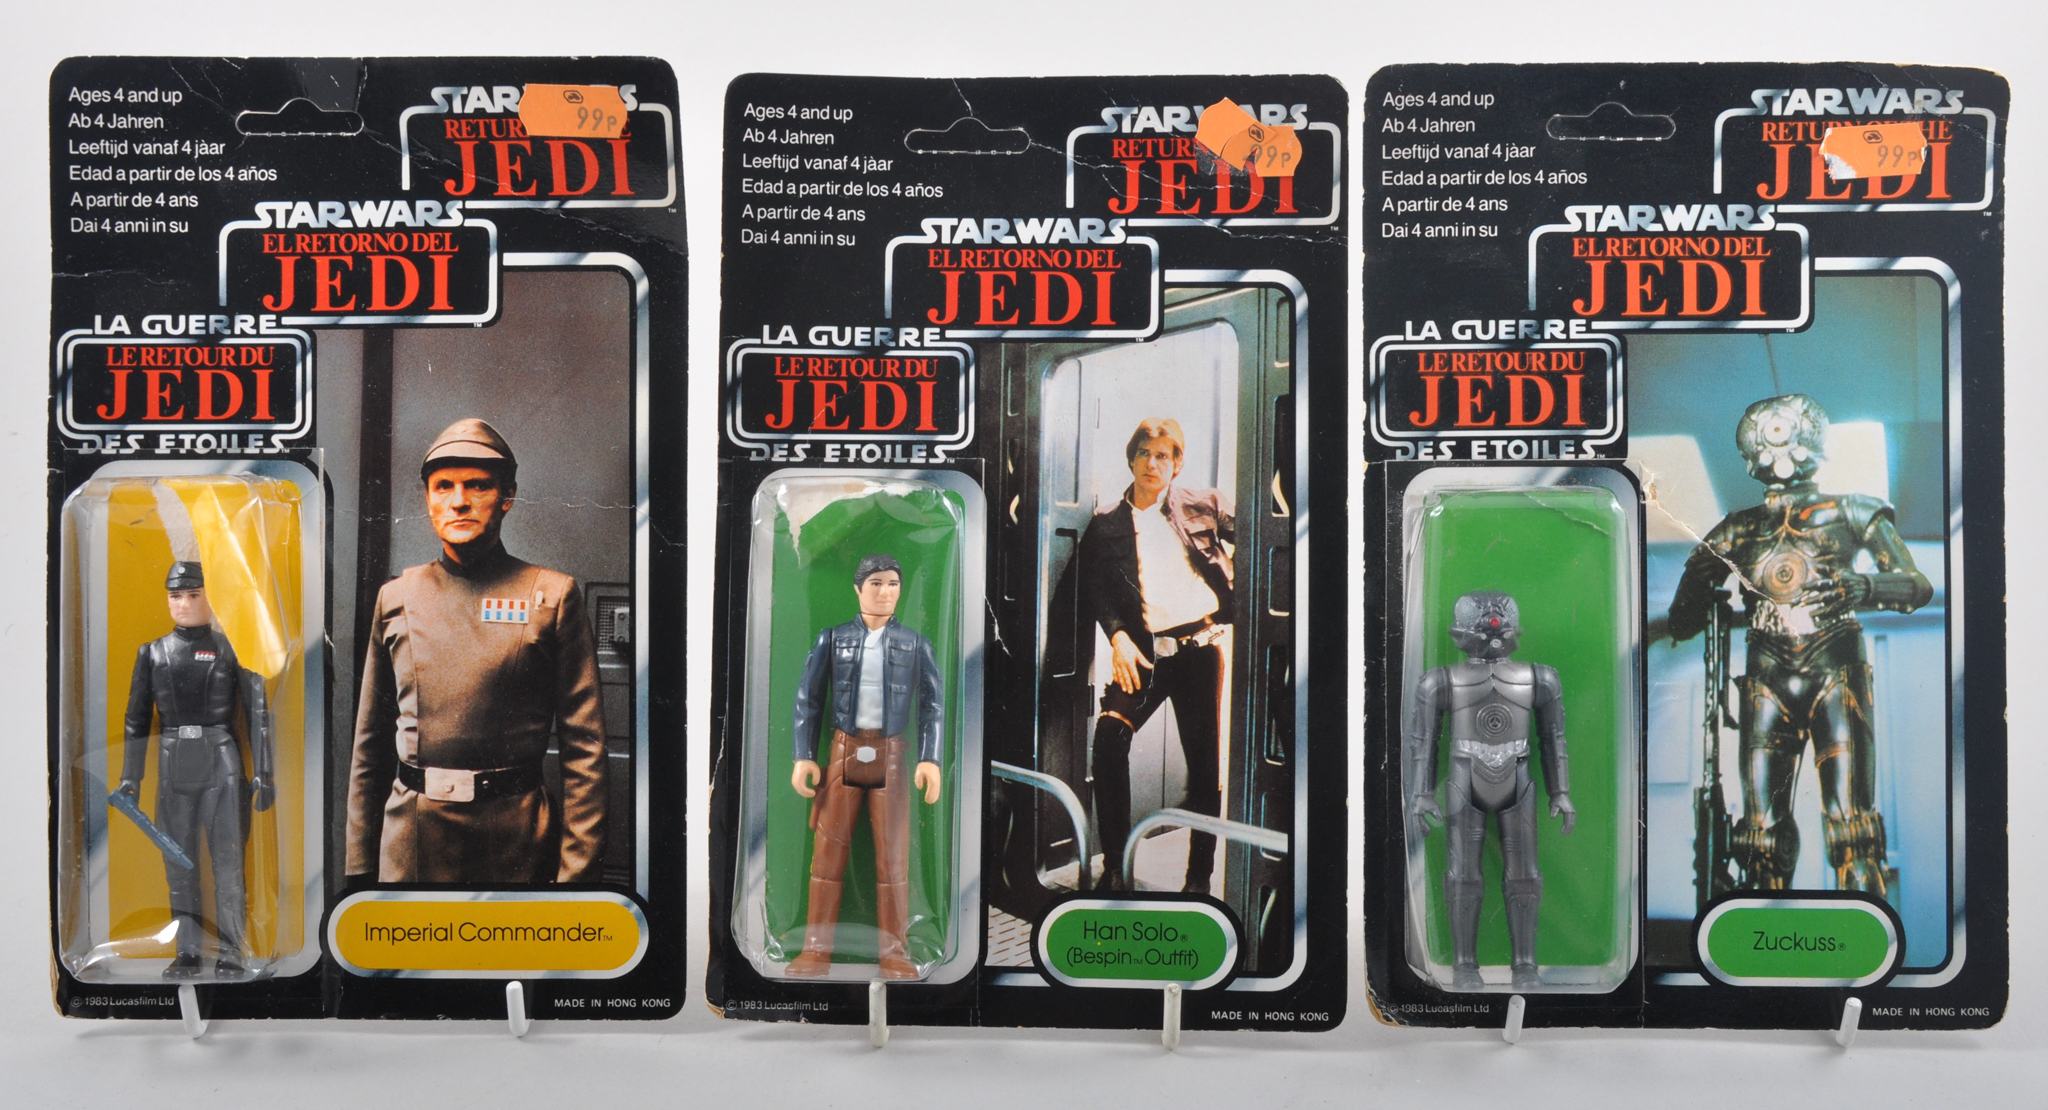 Star Wars Return of the Jedi action figures in Tri-Logo blister packs, by Palitoy, Han Solo,